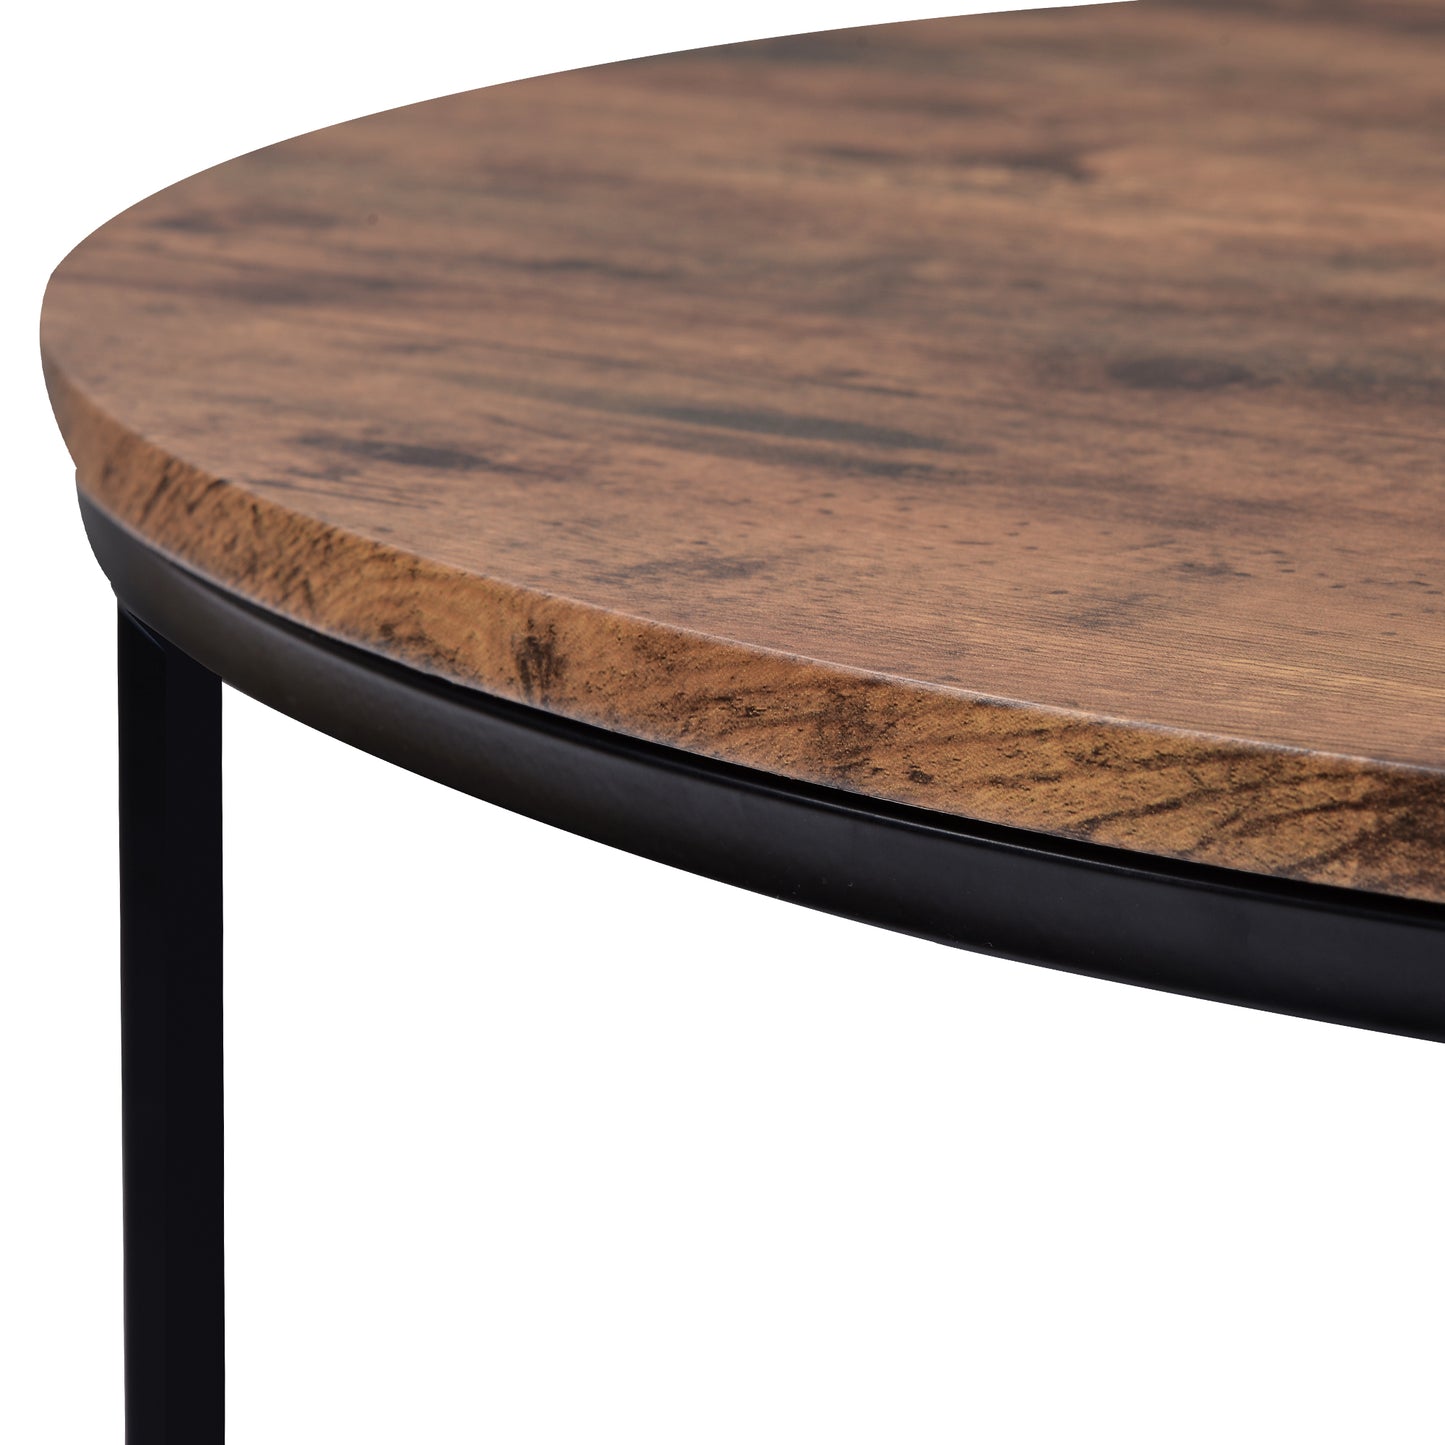 Round Coffee Table with Caster Wheels